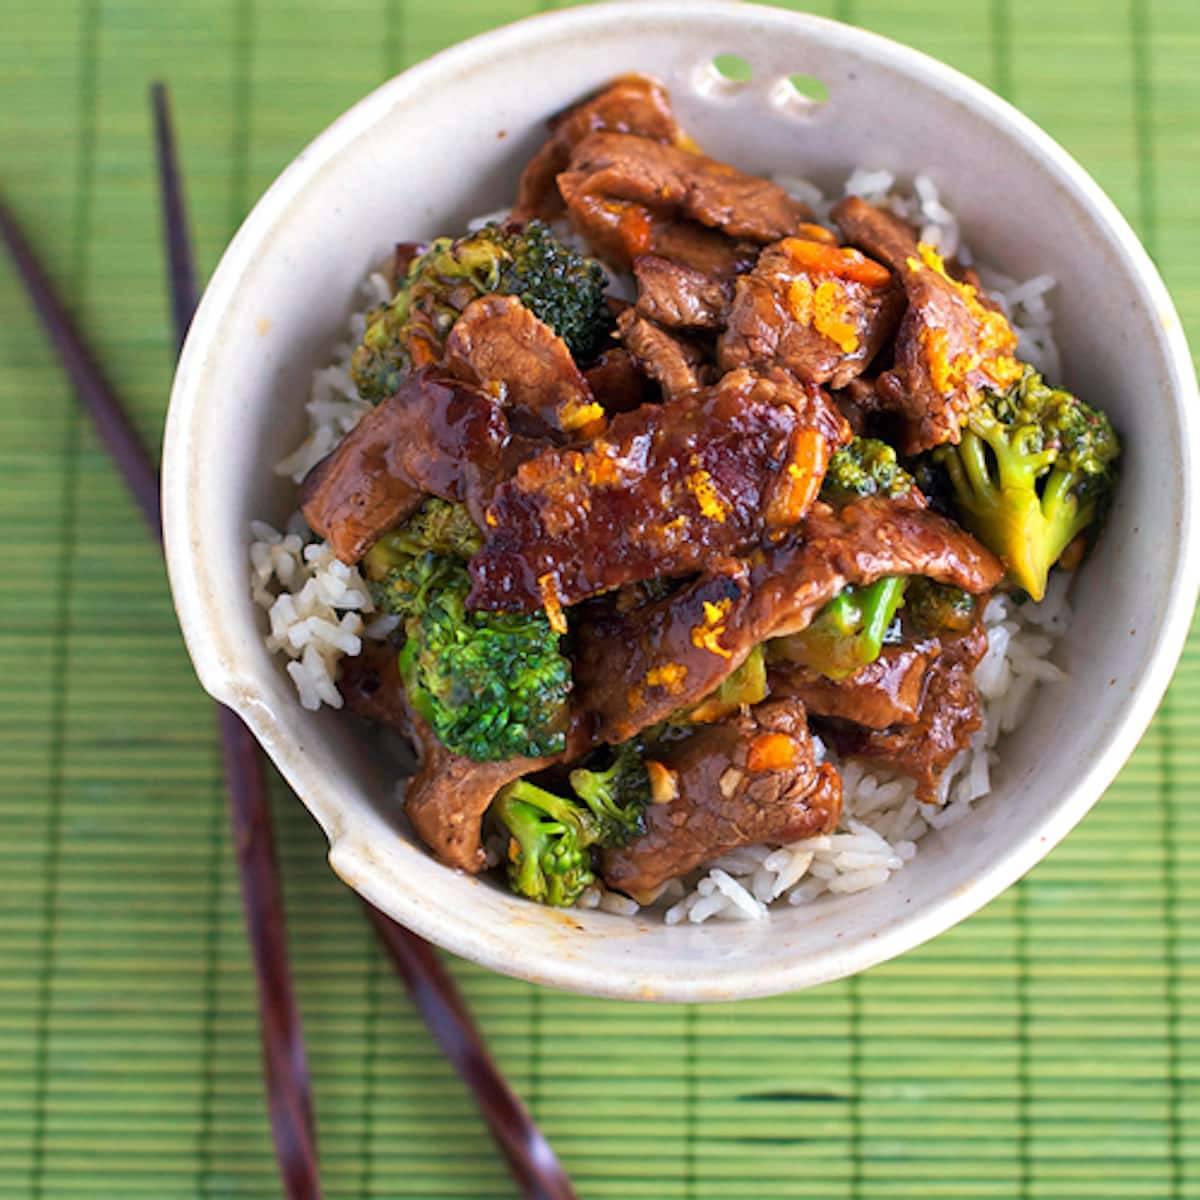 Light orange beef and broccoli in a bowl with rice.